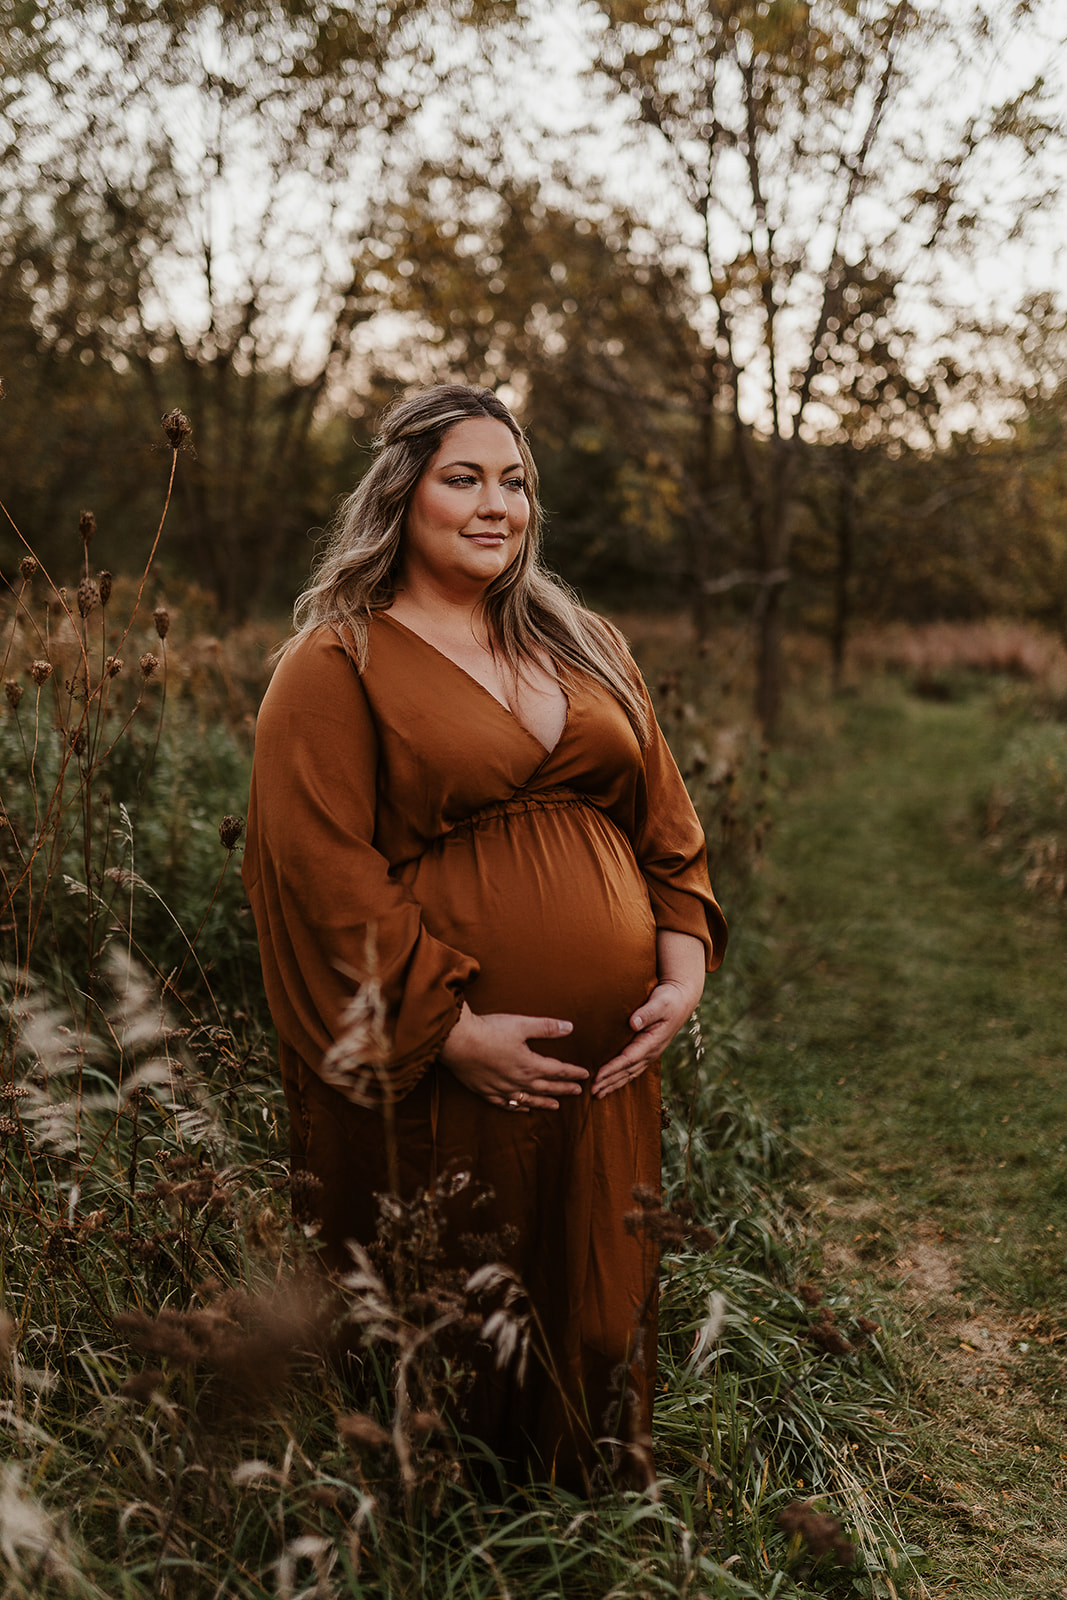 Pregnant mother in a bronze gown holds her belly among the Fall foliage